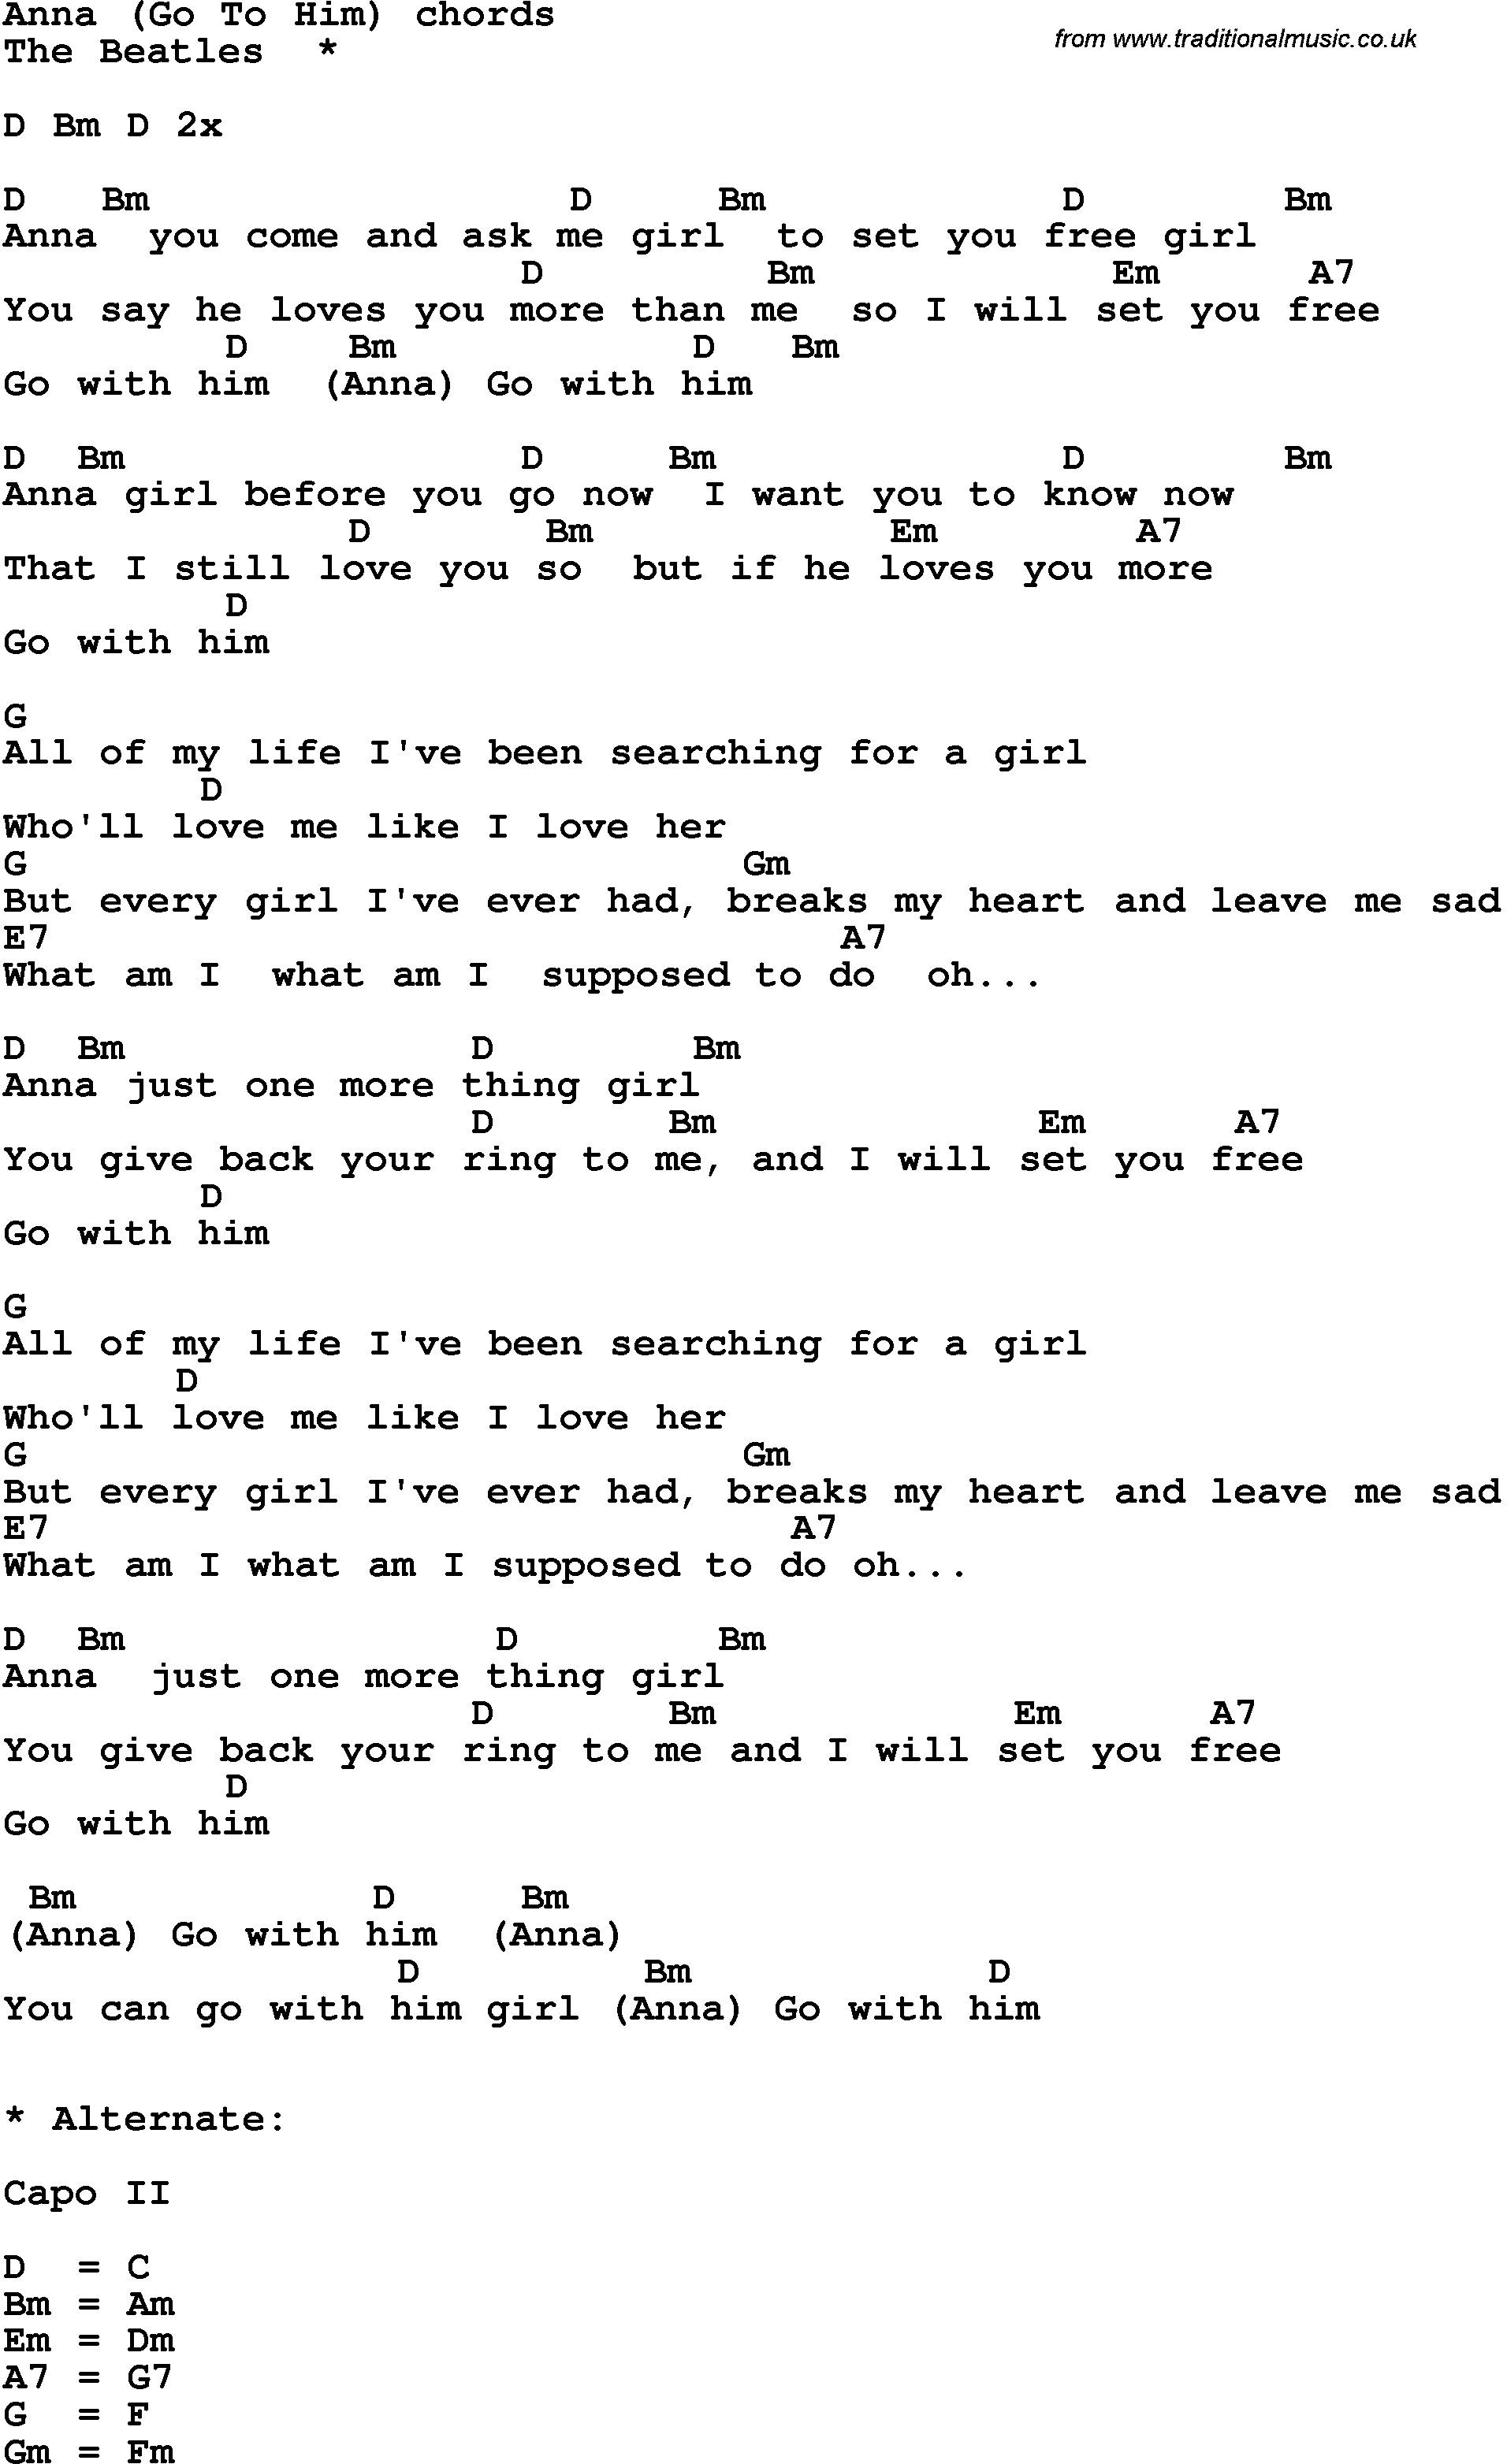 Song Lyrics with guitar chords for Anna - The Beatles